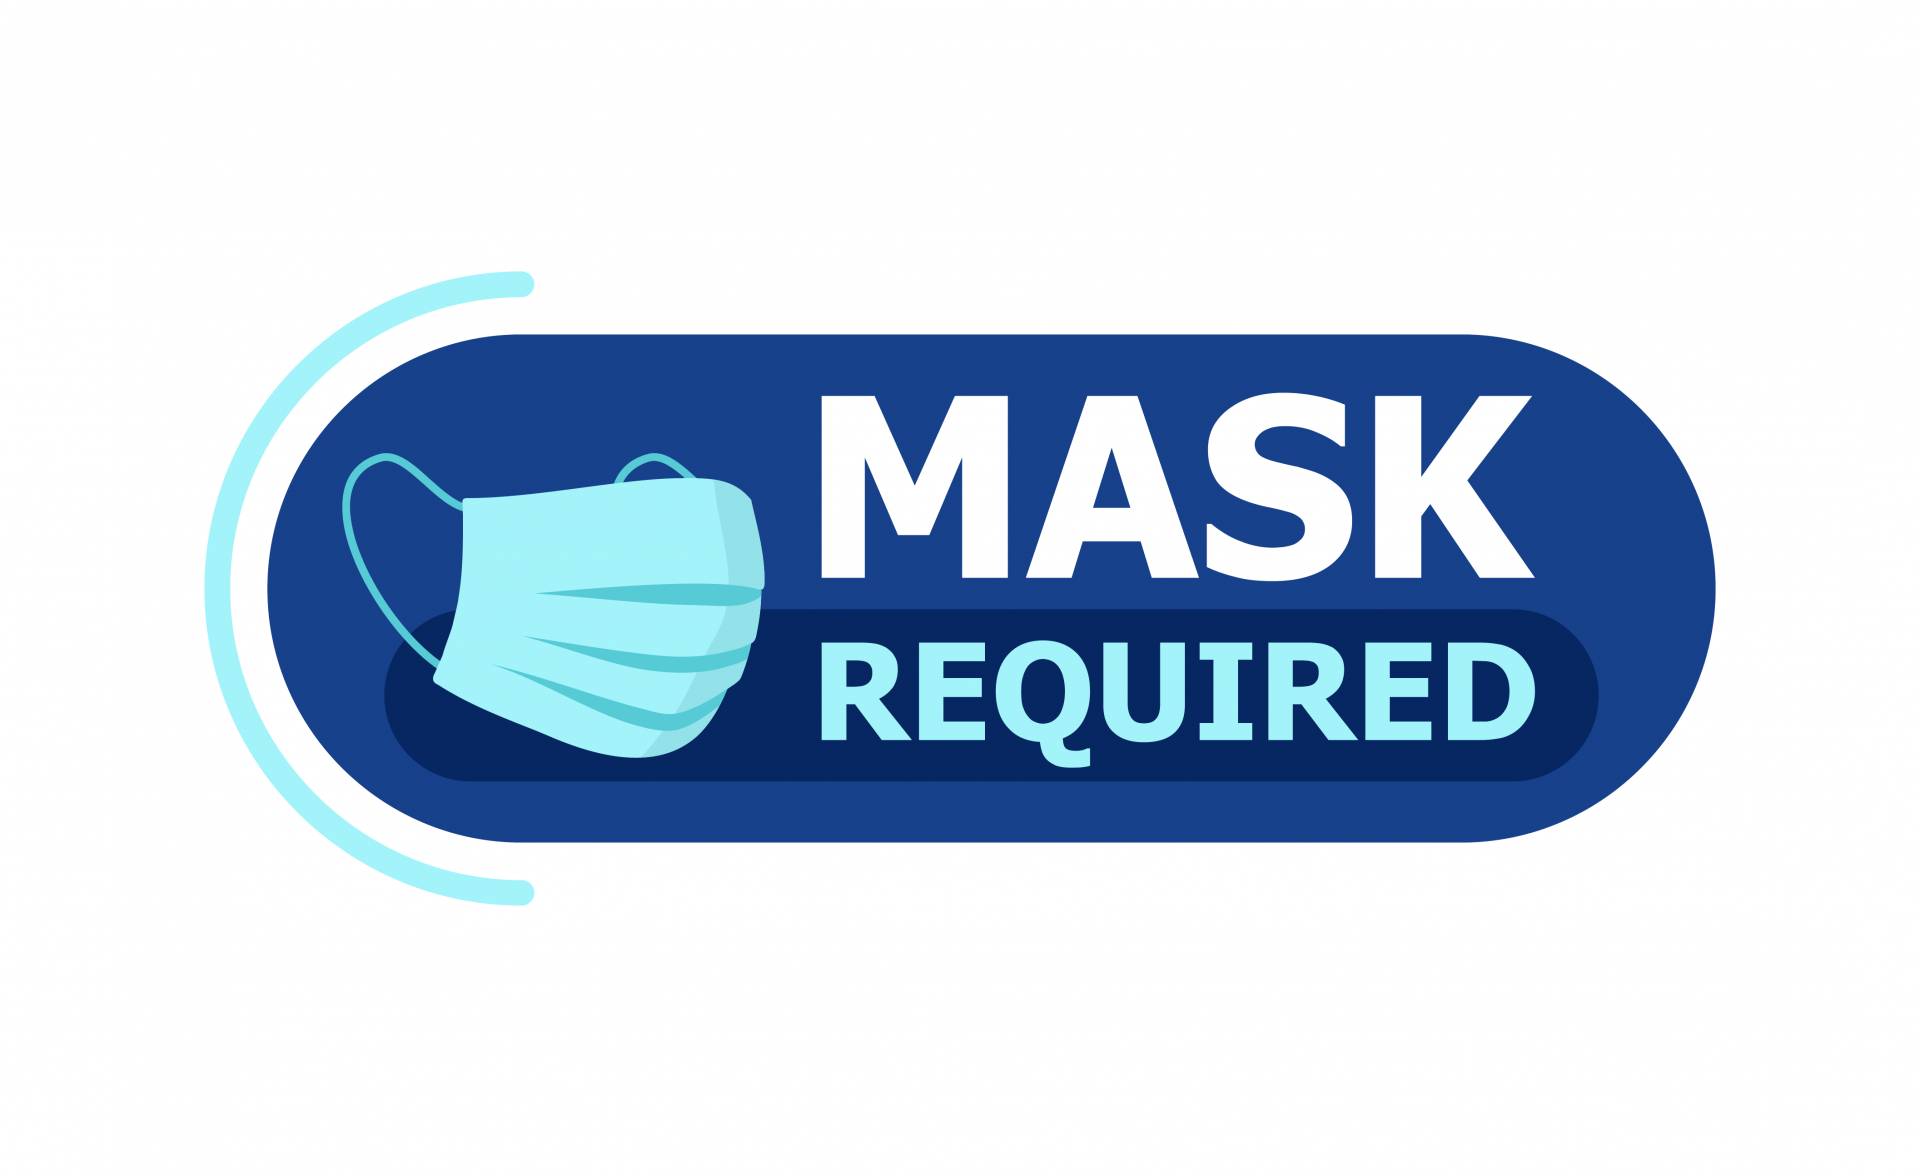 image of facemask that states mask required